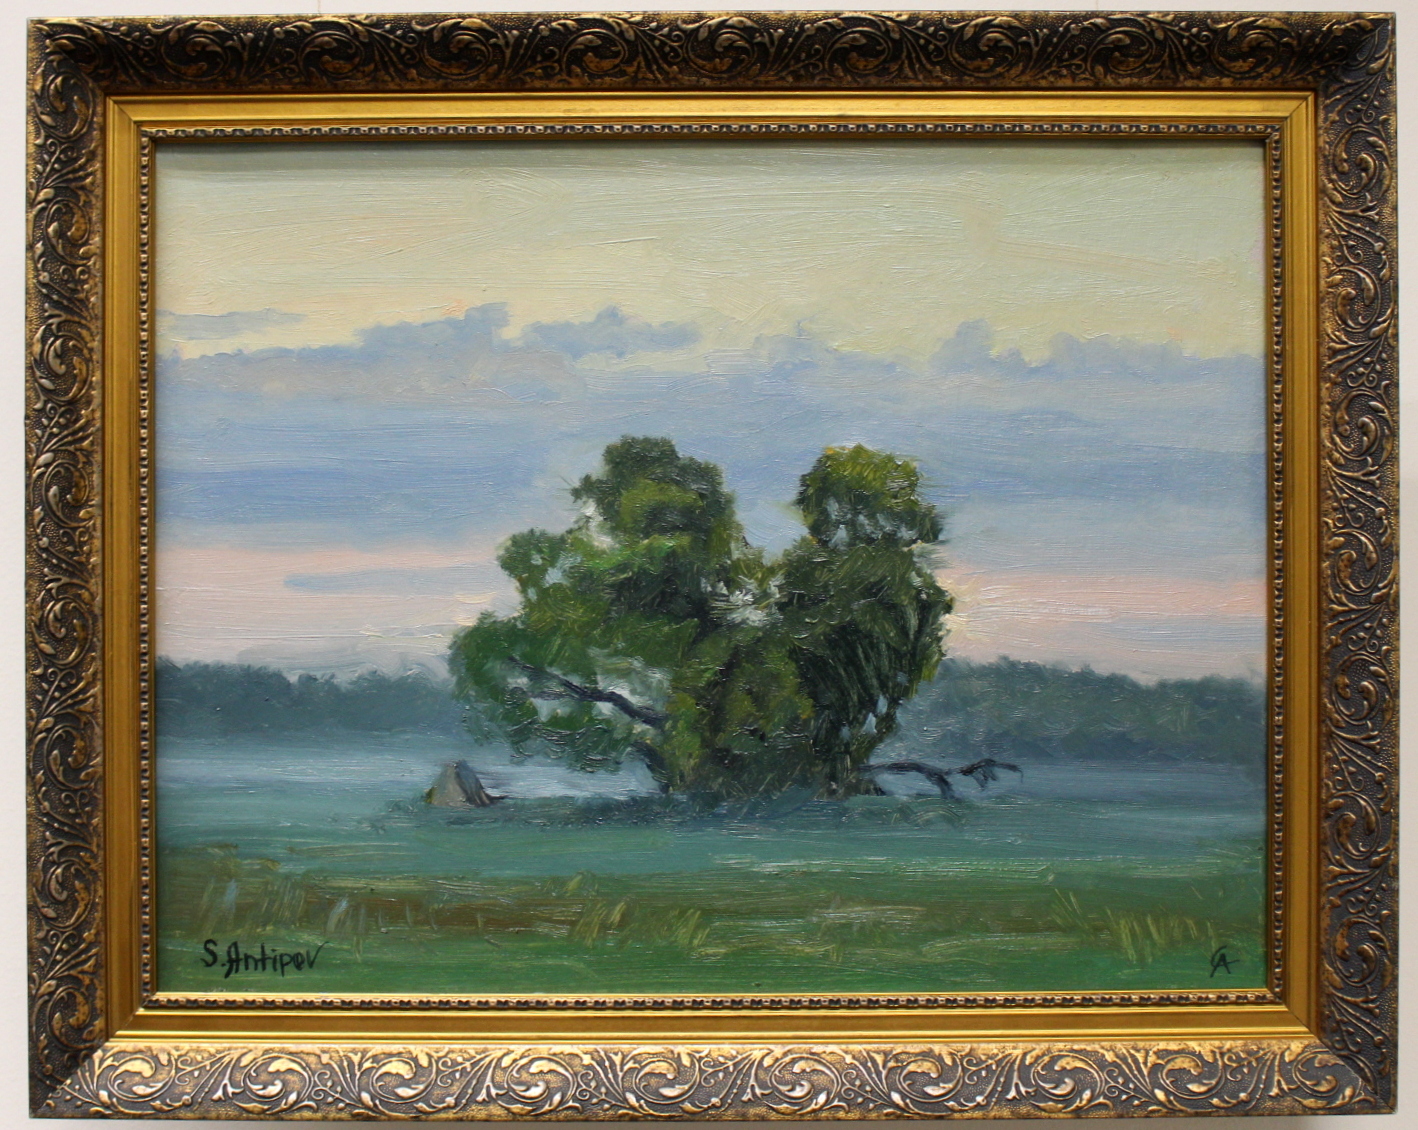 a painting of a tree in a landscape